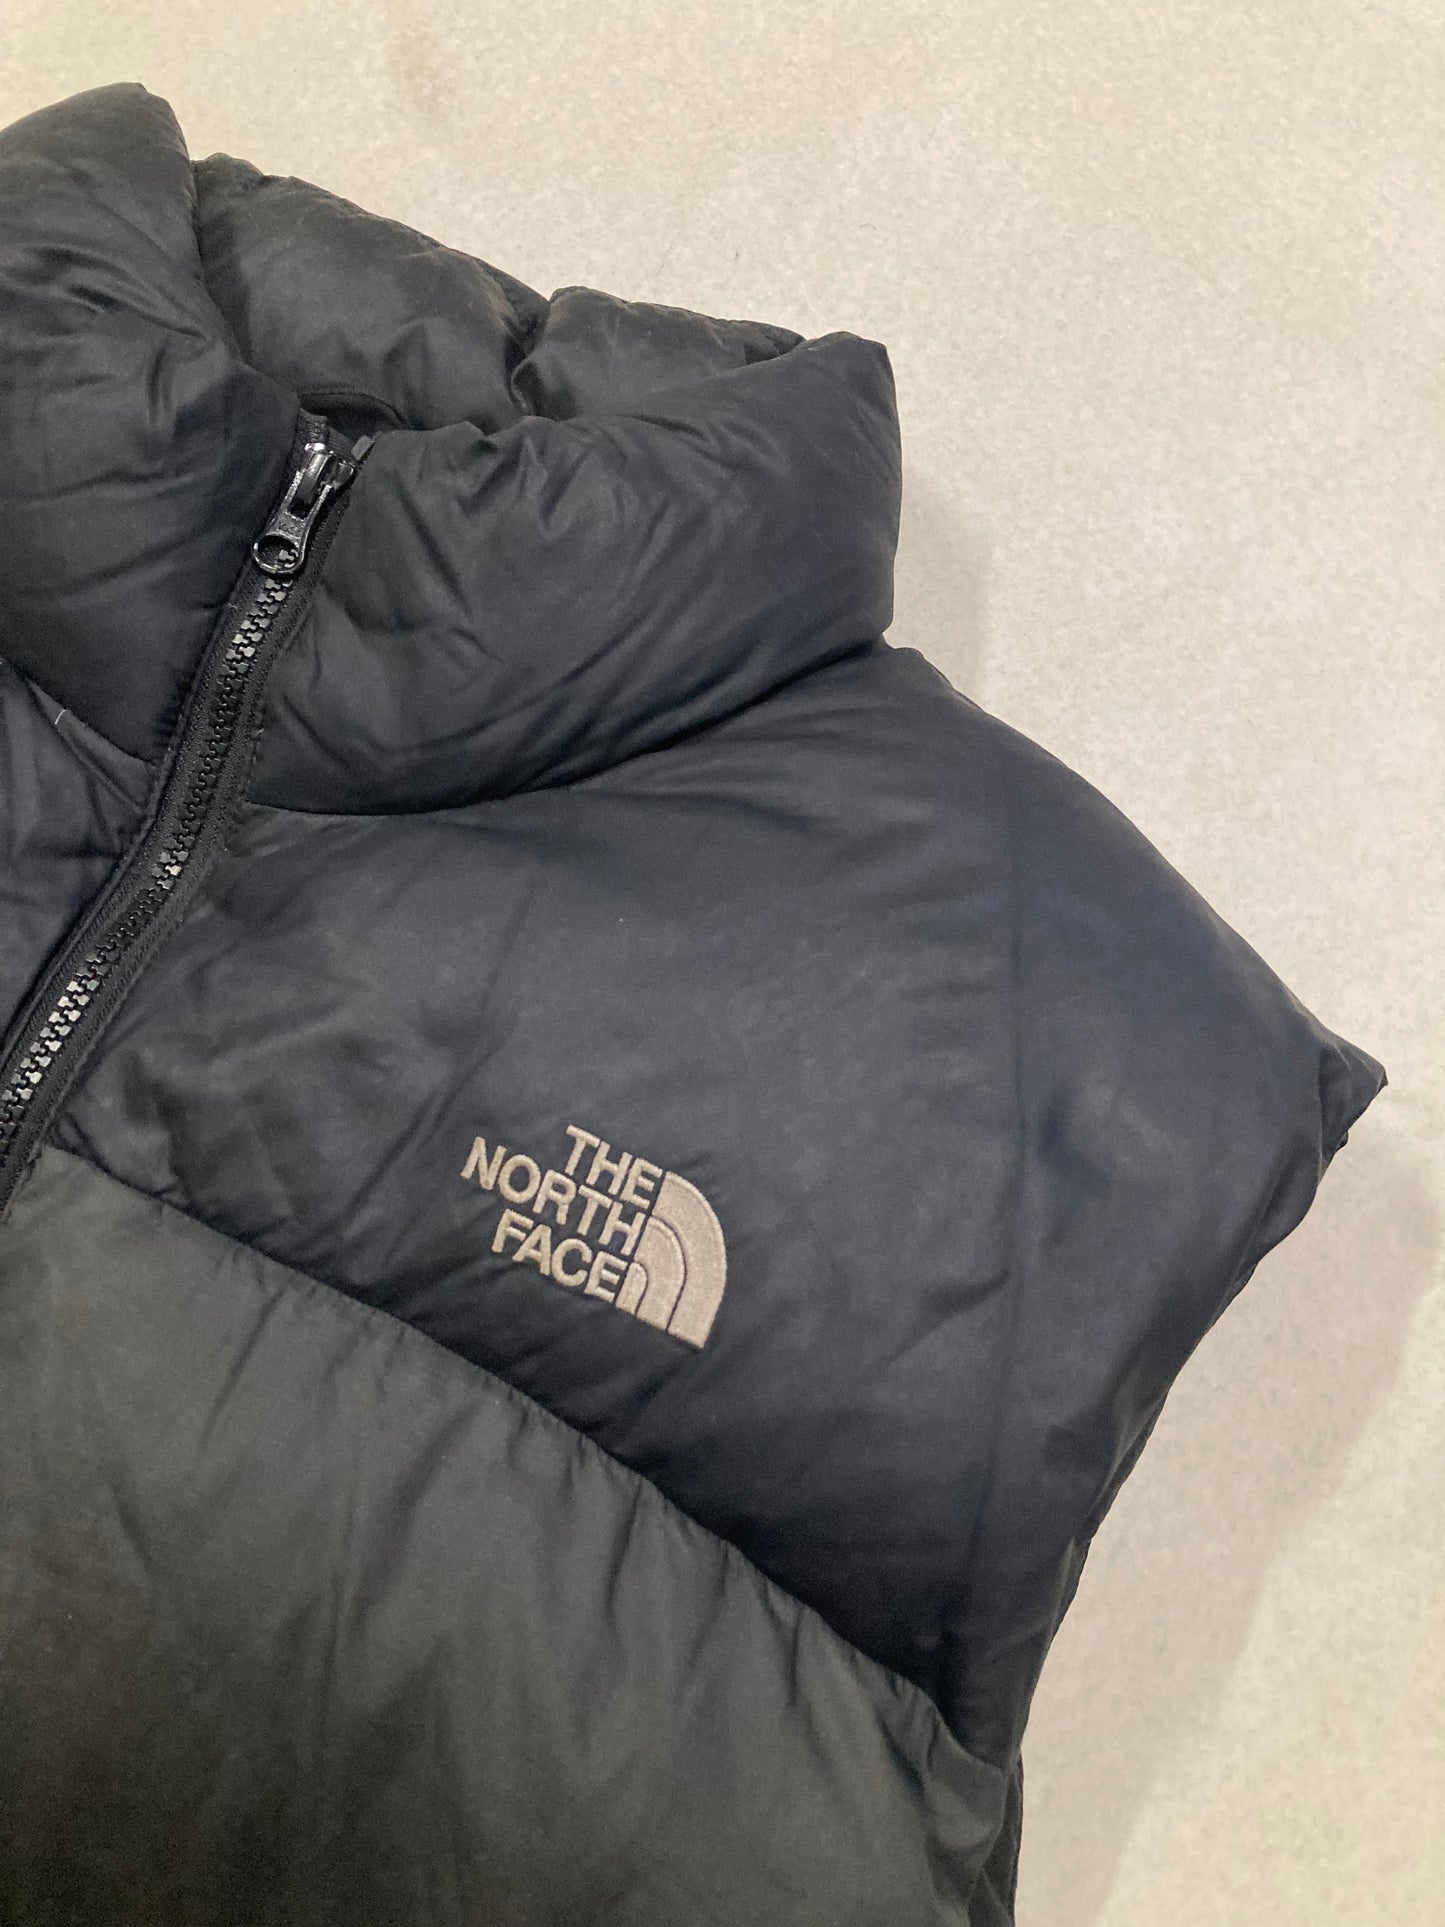 Chaleco The North Face 700 00s Vintage - L